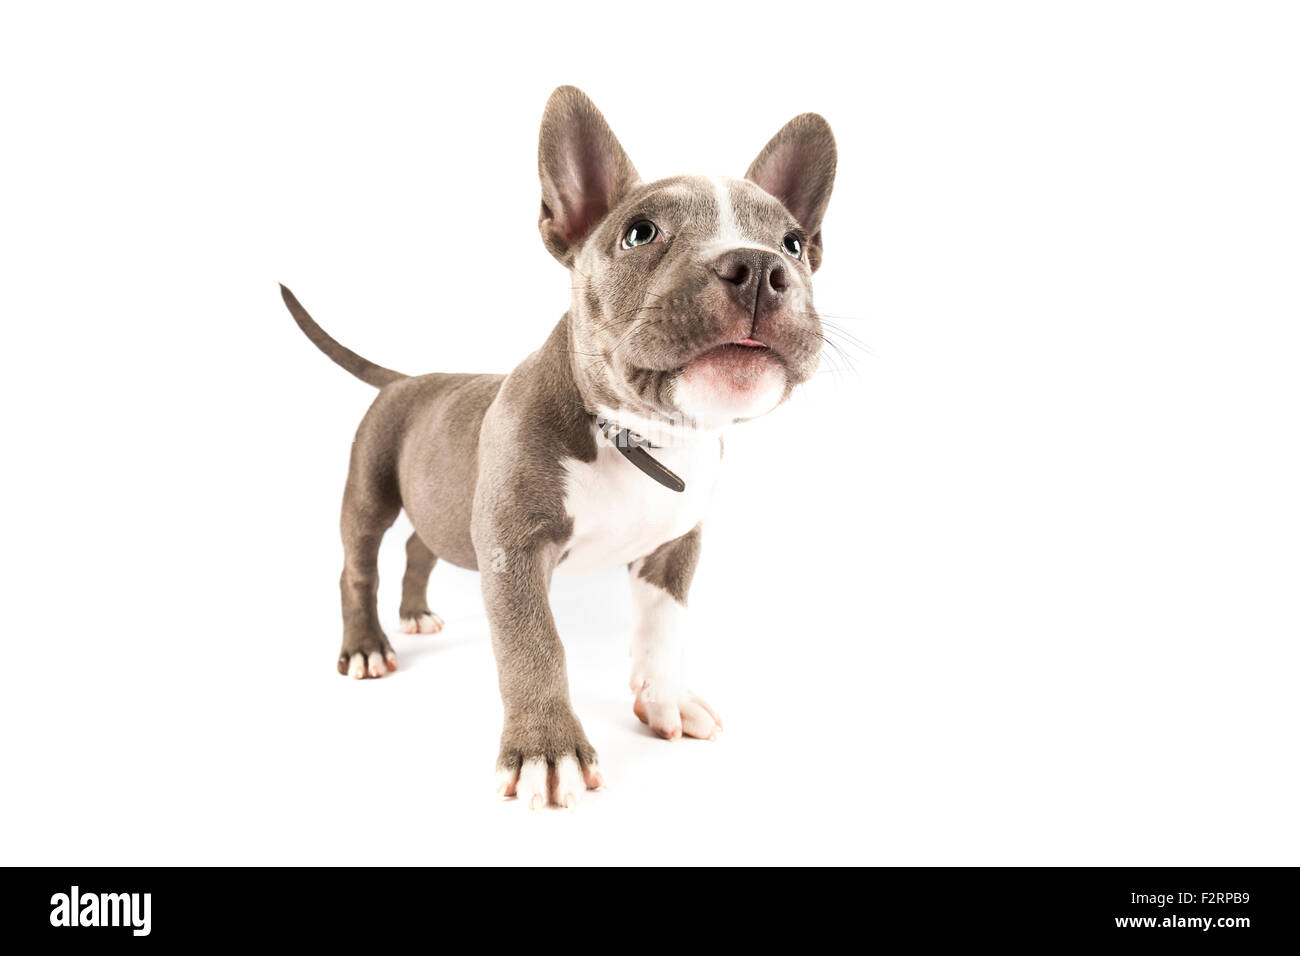 American Pocket Bully pup standing on white background Stock Photo